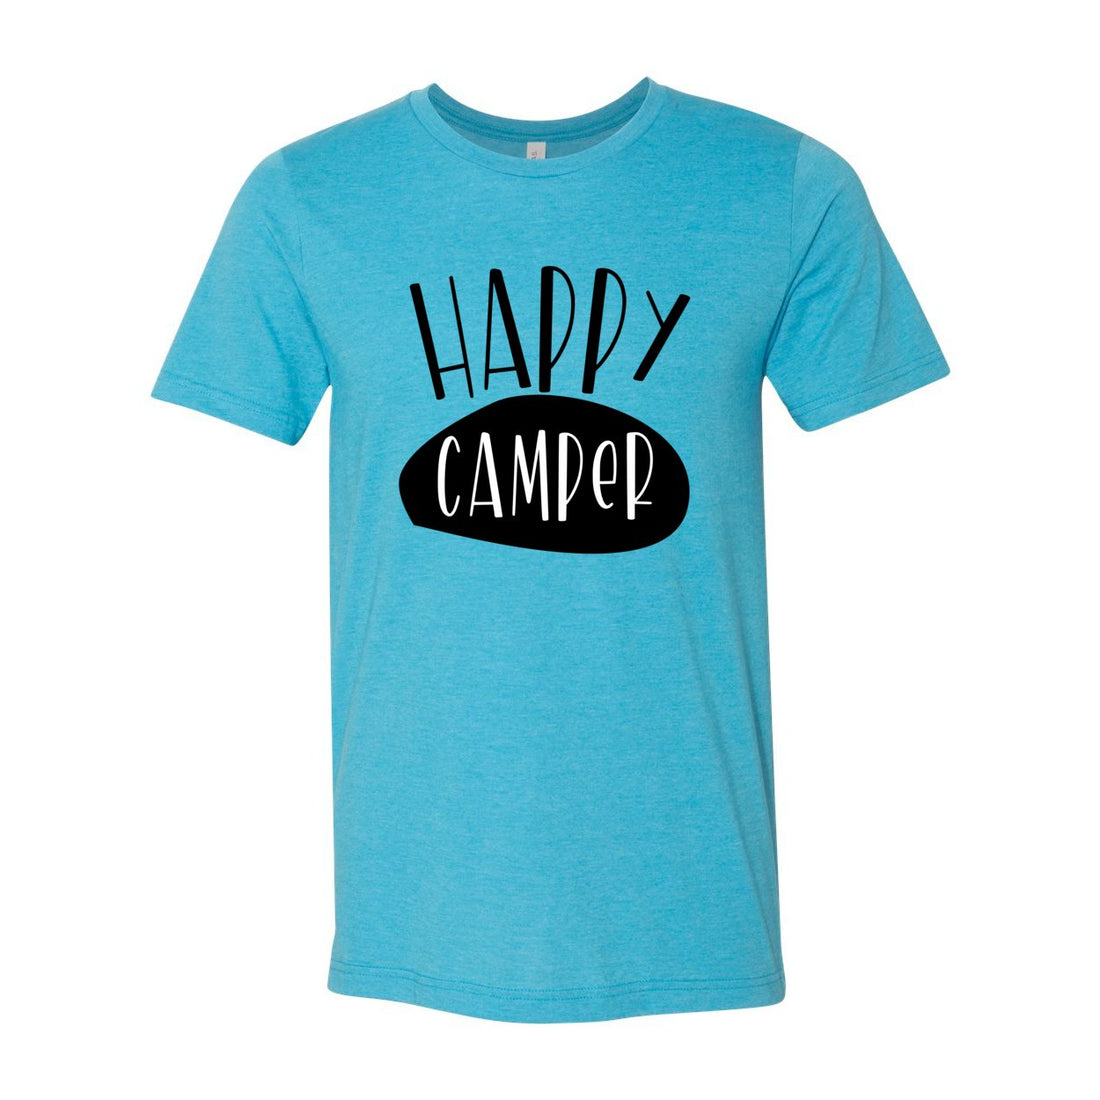 Happy Camper Sleeve Jersey Tee - T-Shirts - Positively Sassy - Happy Camper Sleeve Jersey Tee